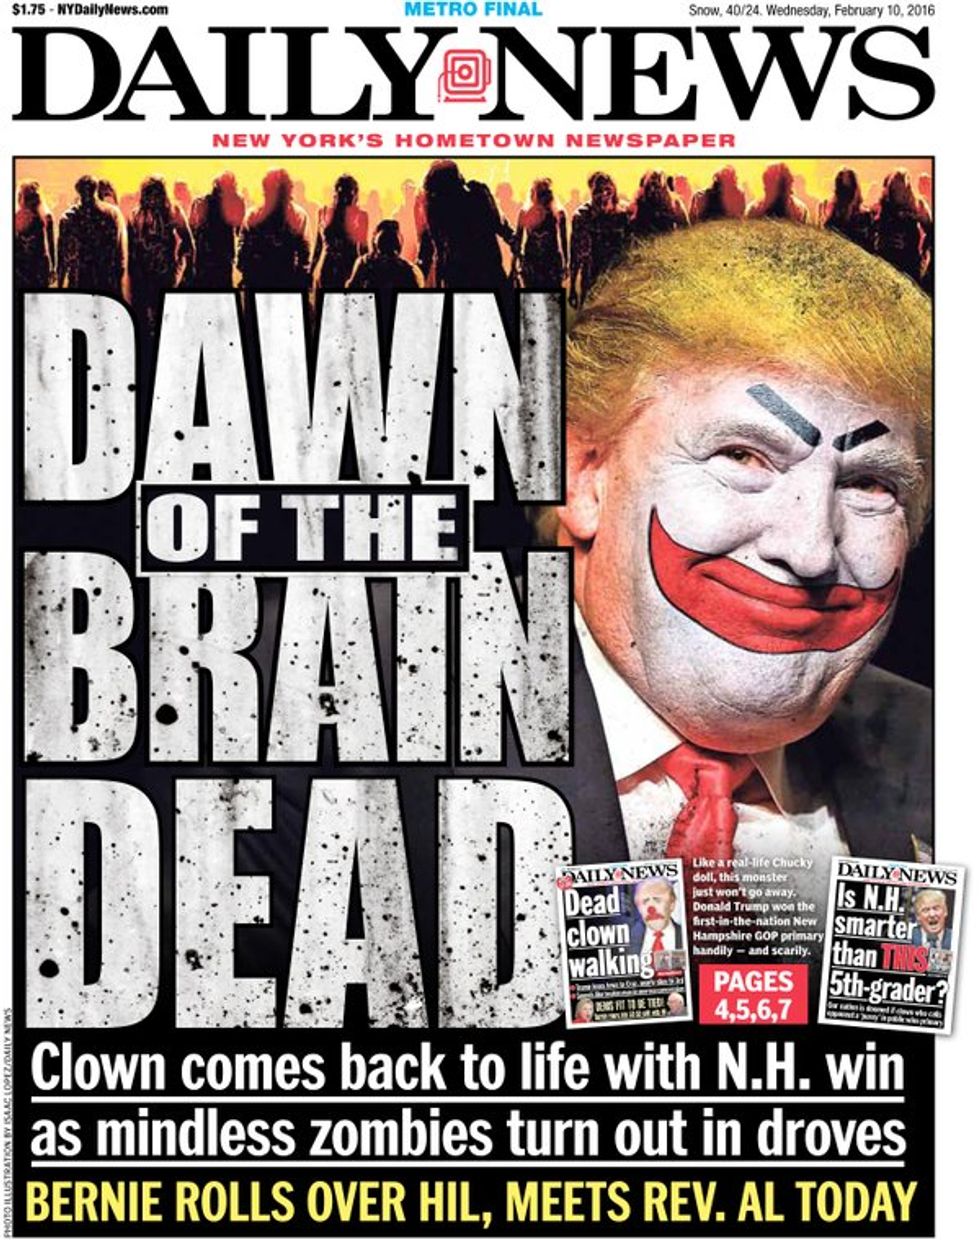 New York Daily News Depicts Trump As a Clown, Says His Supporters Are 'Mindless Zombies